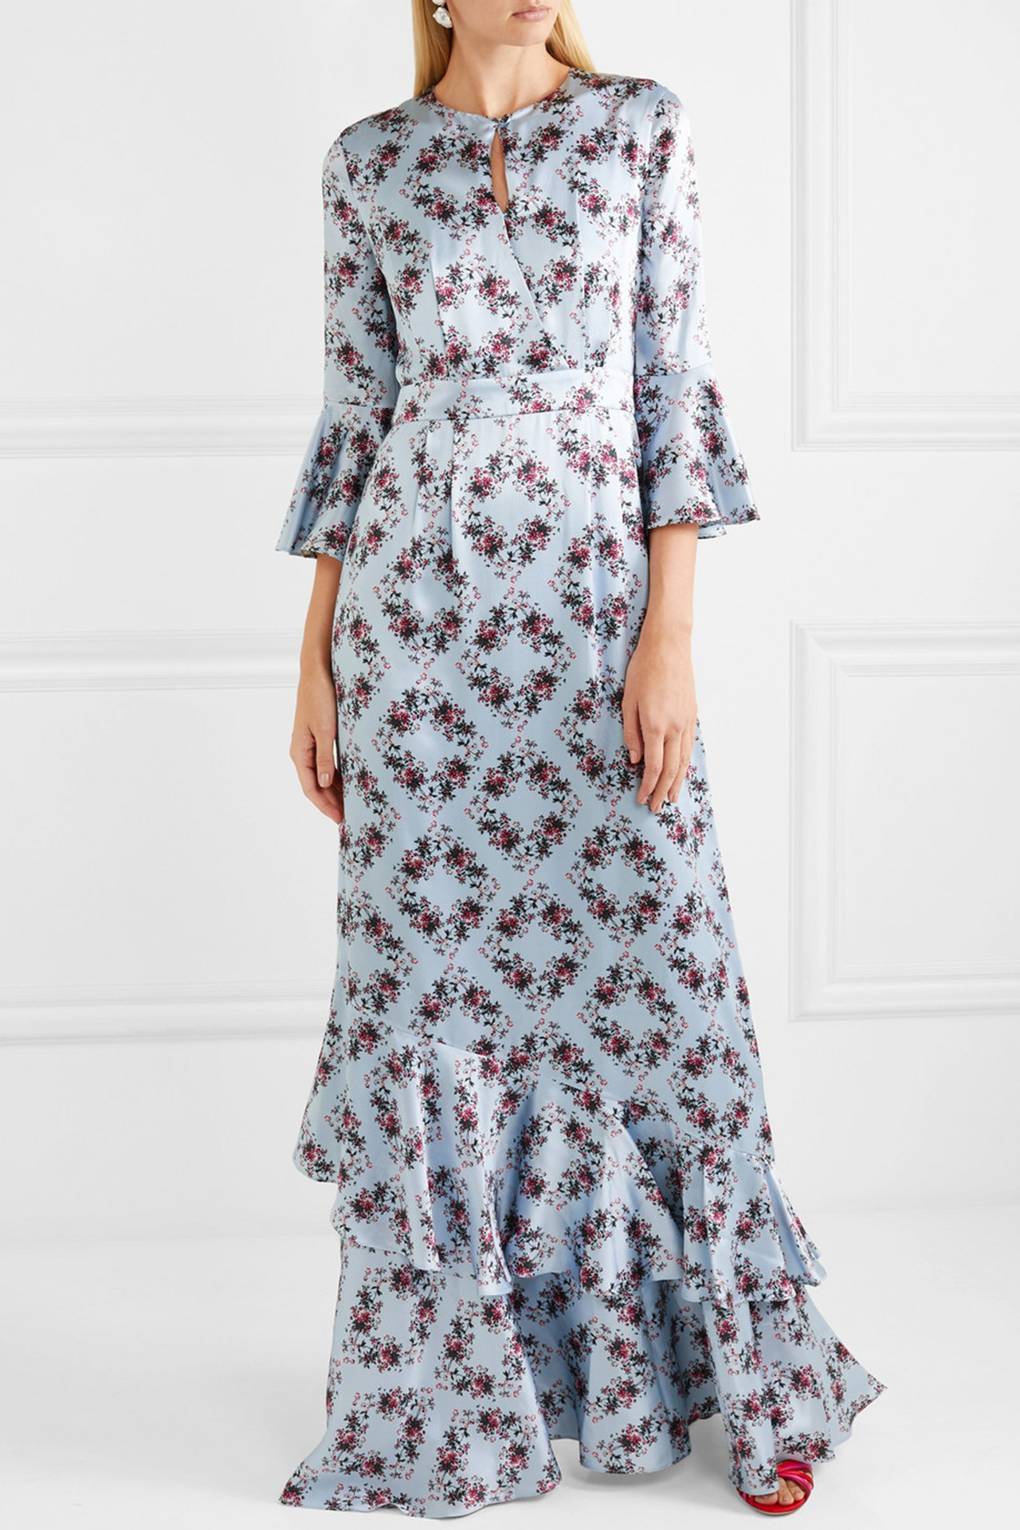 Zara Floral Midi Dress: Will This Be The Most Popular Dress Of The ...